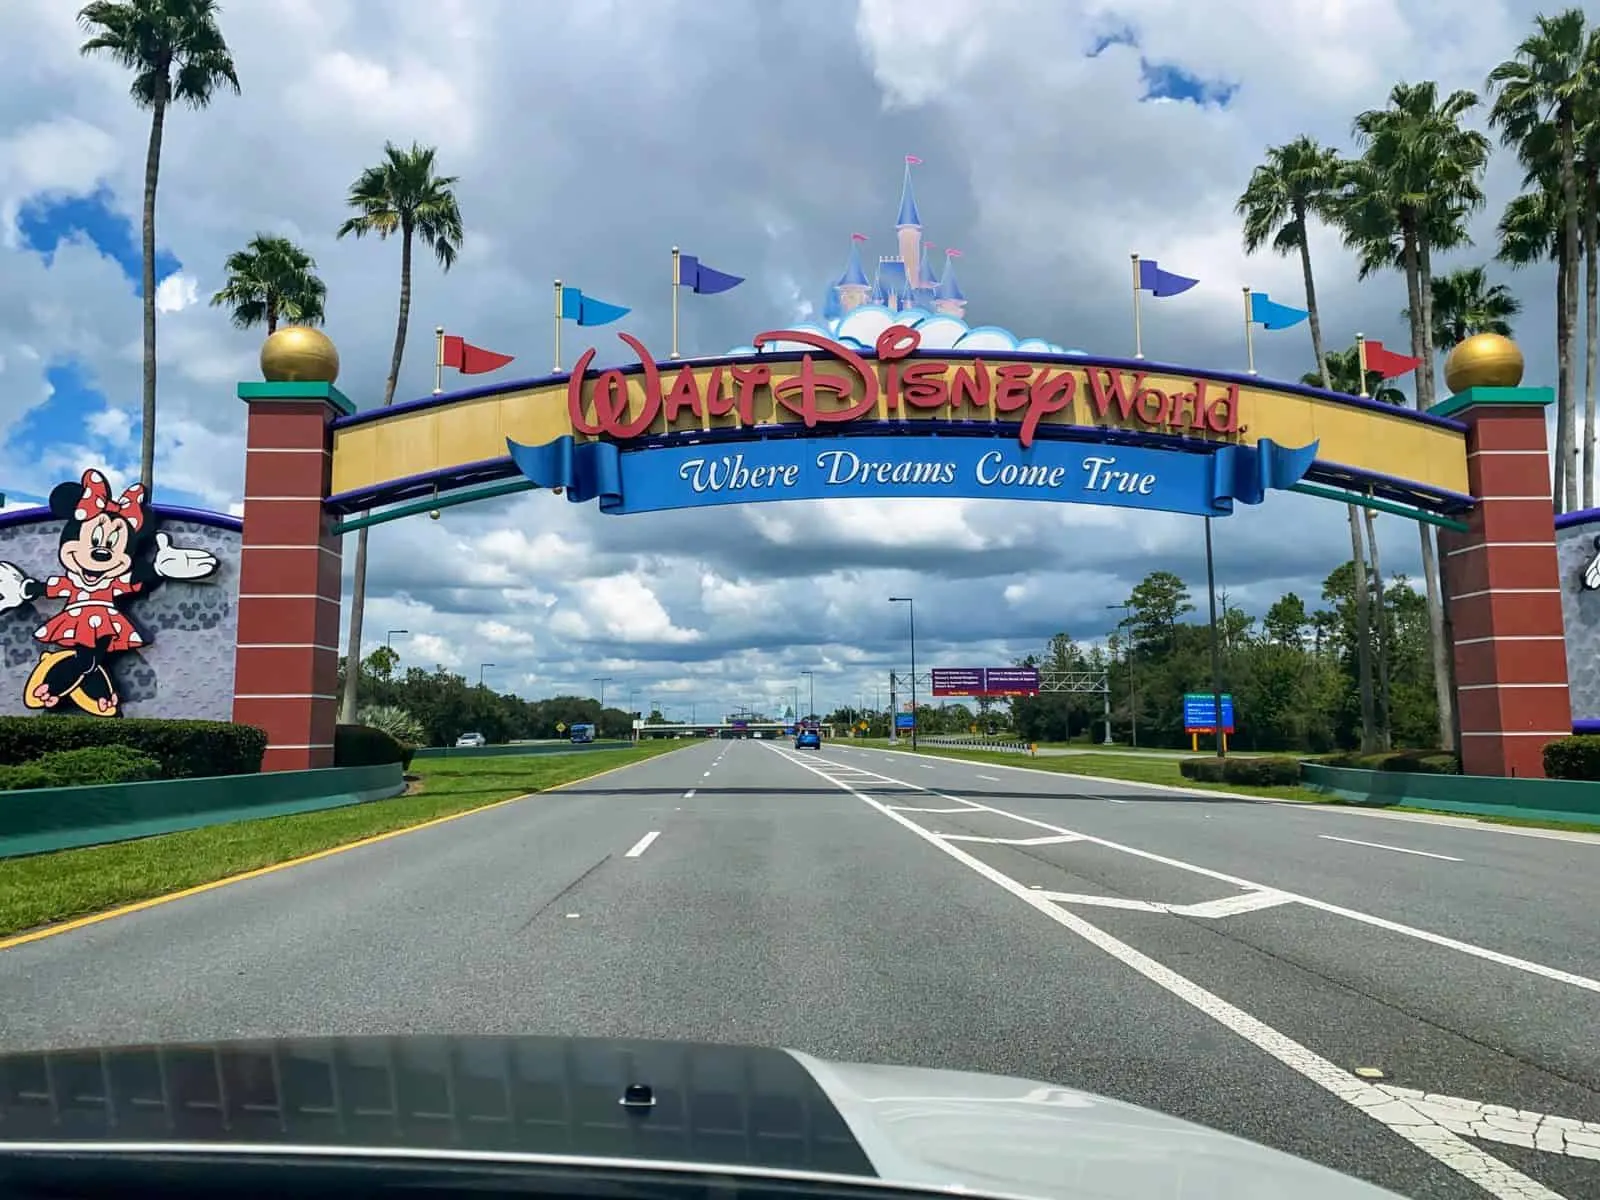 Disney World on a budget: 6 ways to save on lodging, meals and more